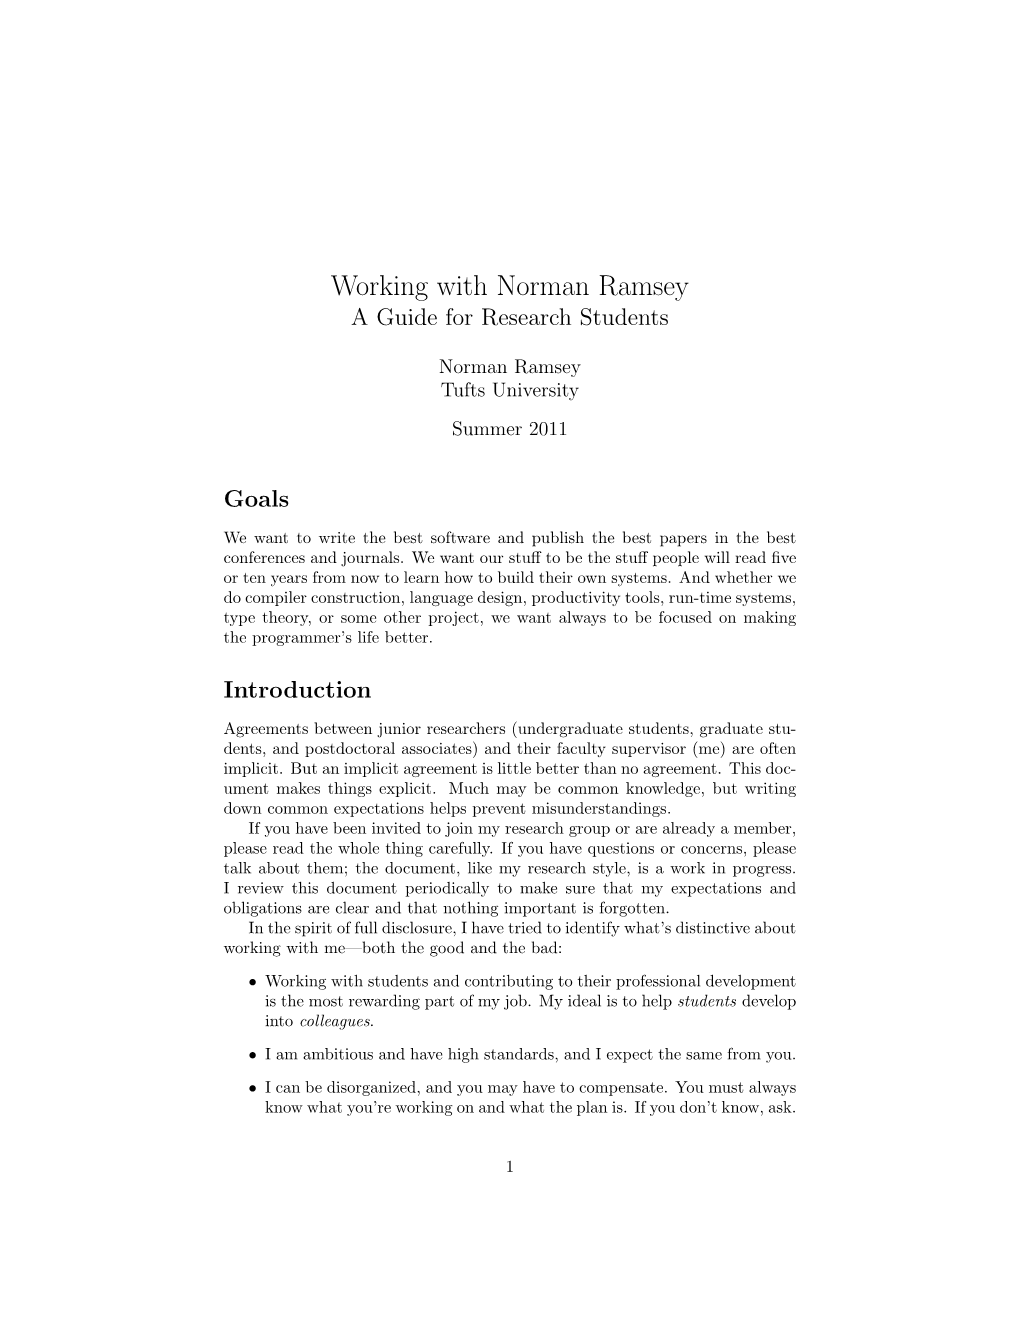 Working with Norman Ramsey: a Guide for Research Students